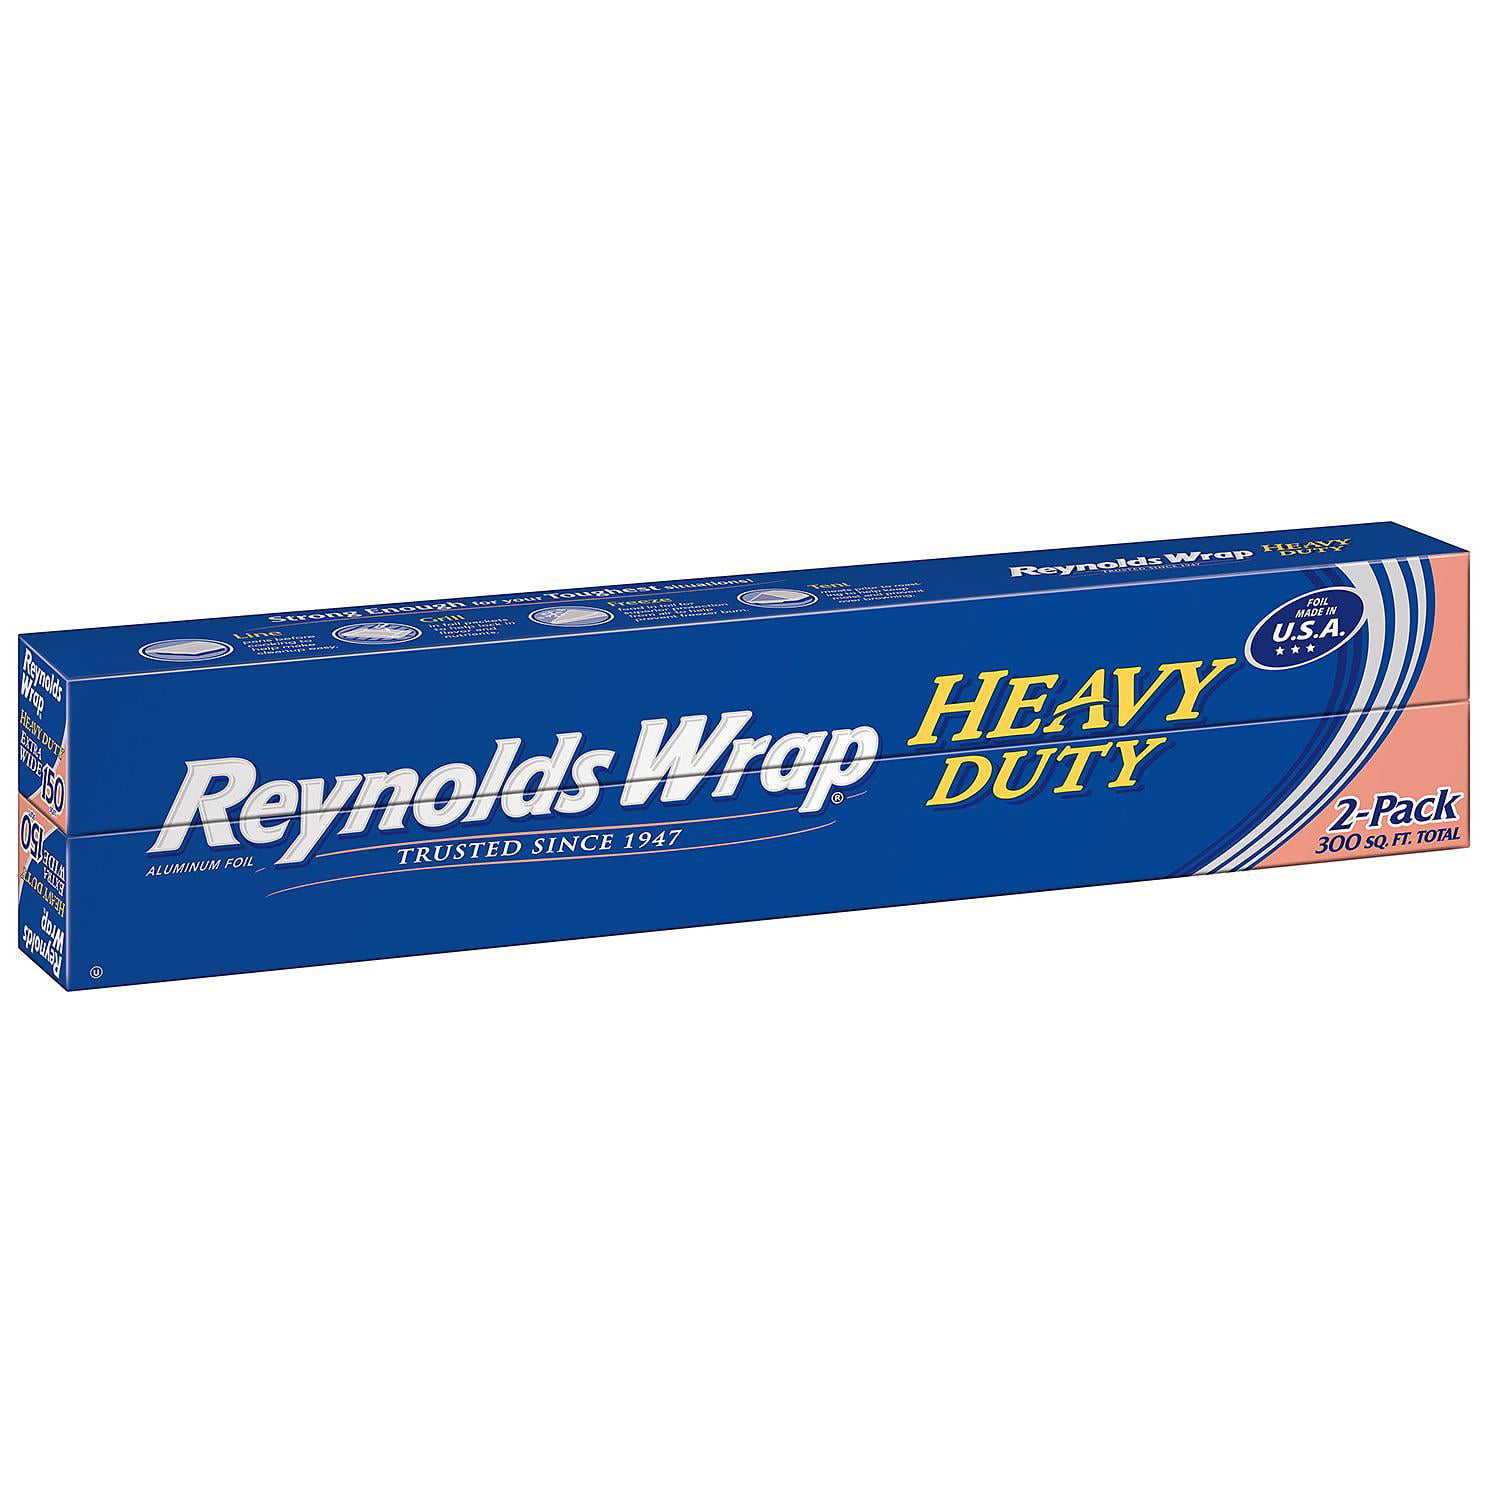 Pack of 2 200 Sq ft 200 Square Foot Roll Reynolds Wrap Aluminum Foil 